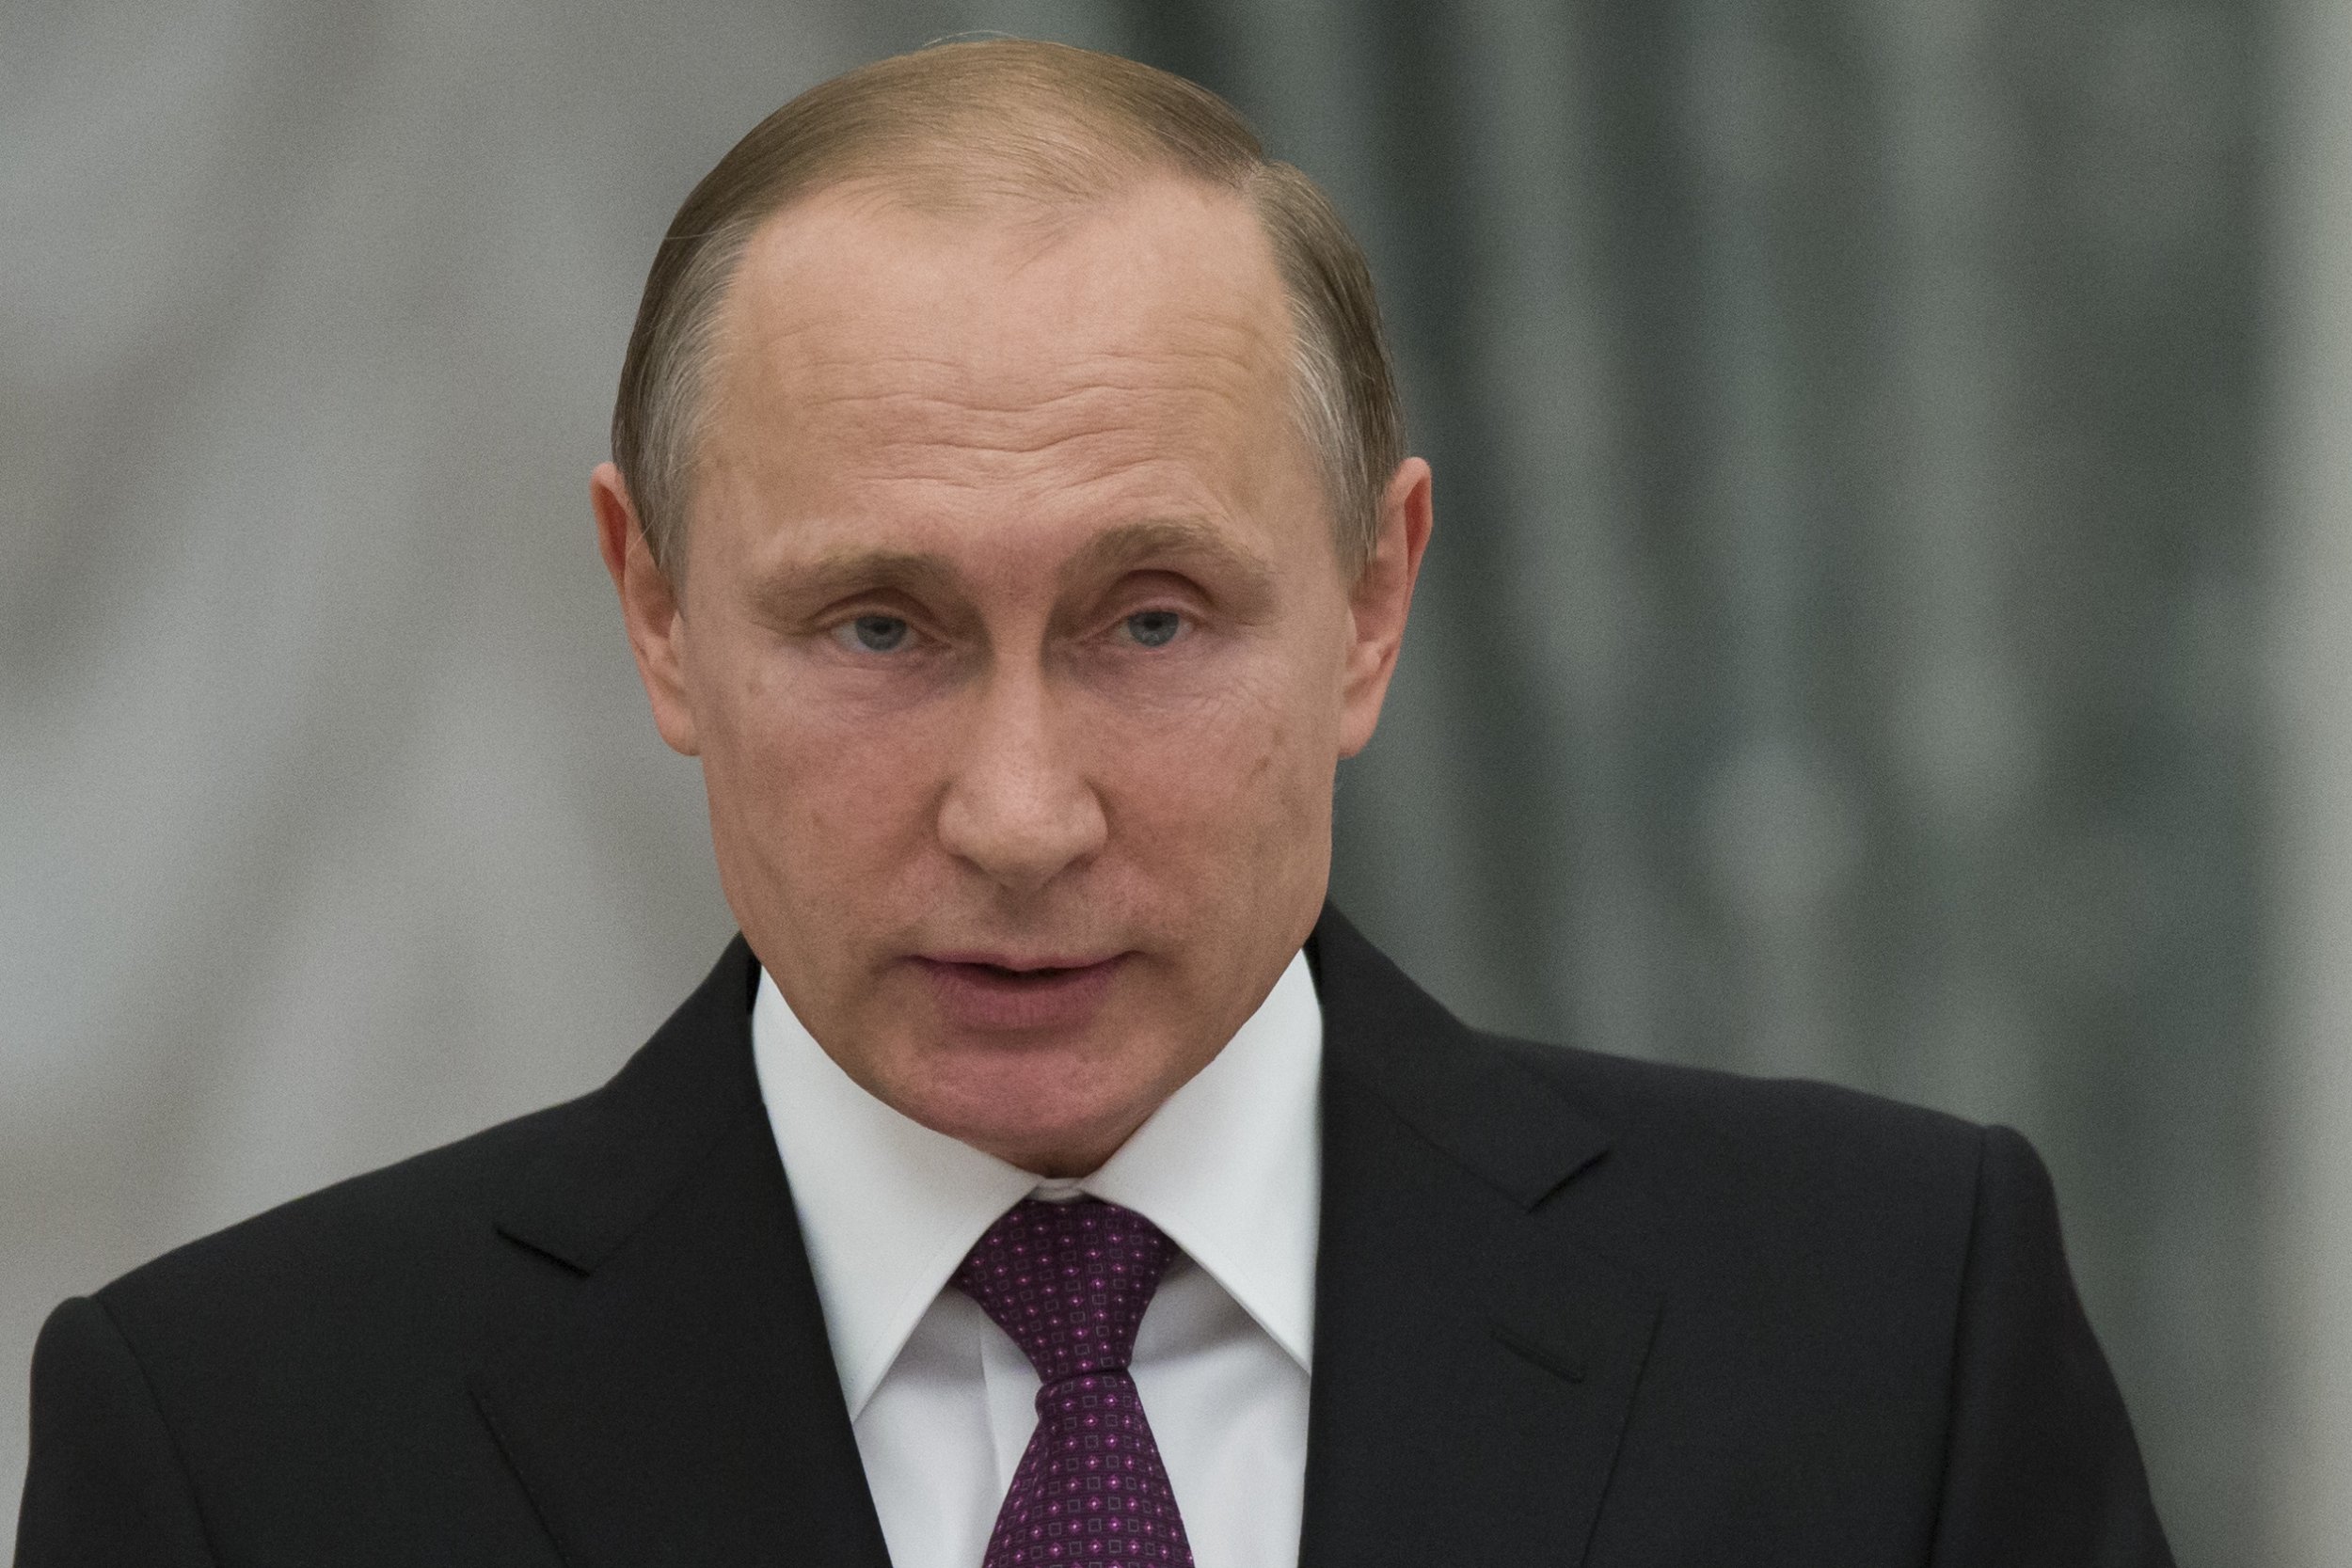 Putin’s Landslide Victory Implications for Russia and the World